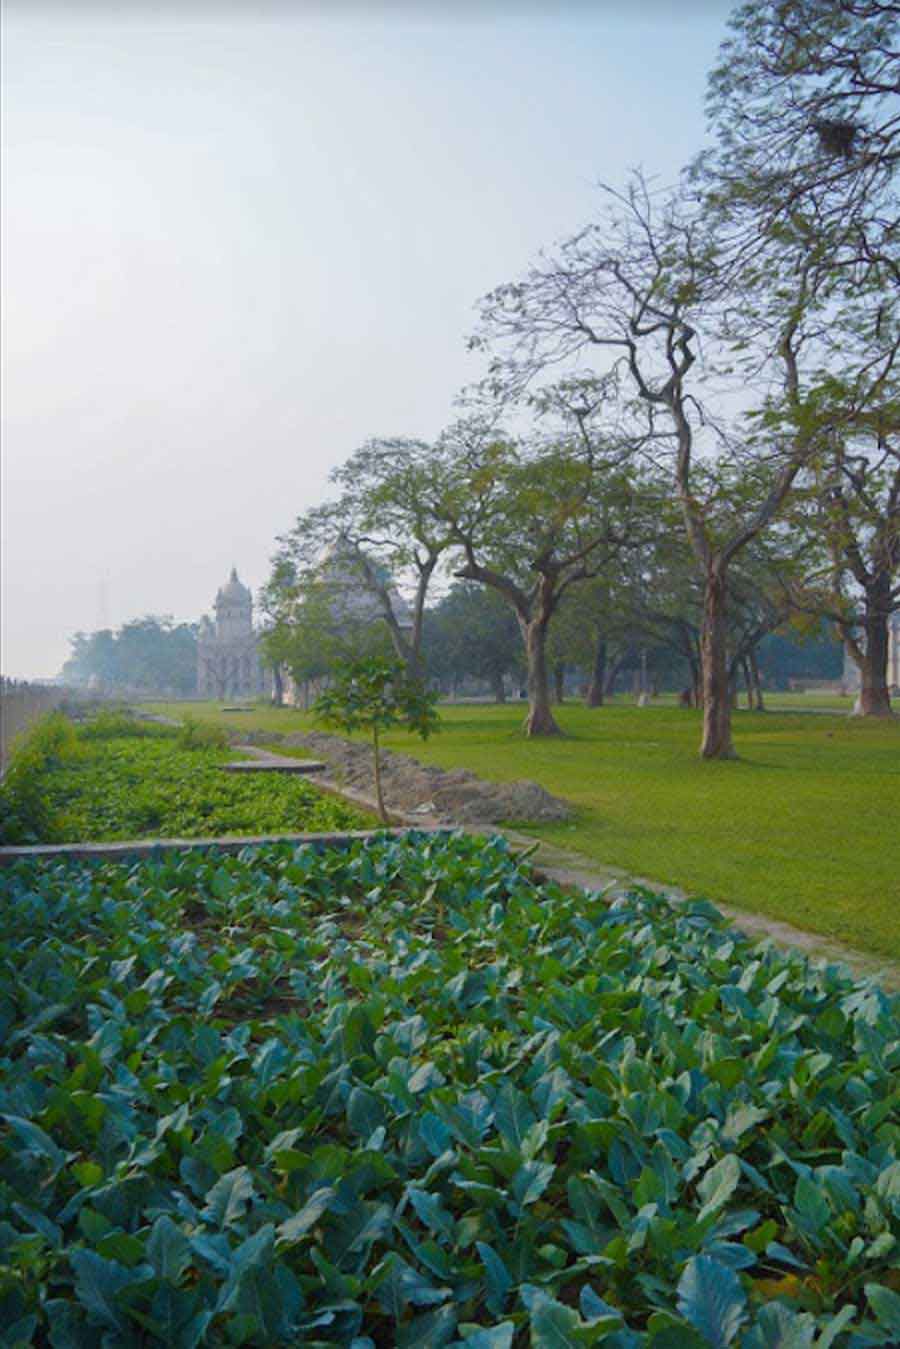 A vegetable patch on Friday morning at Belur Math 